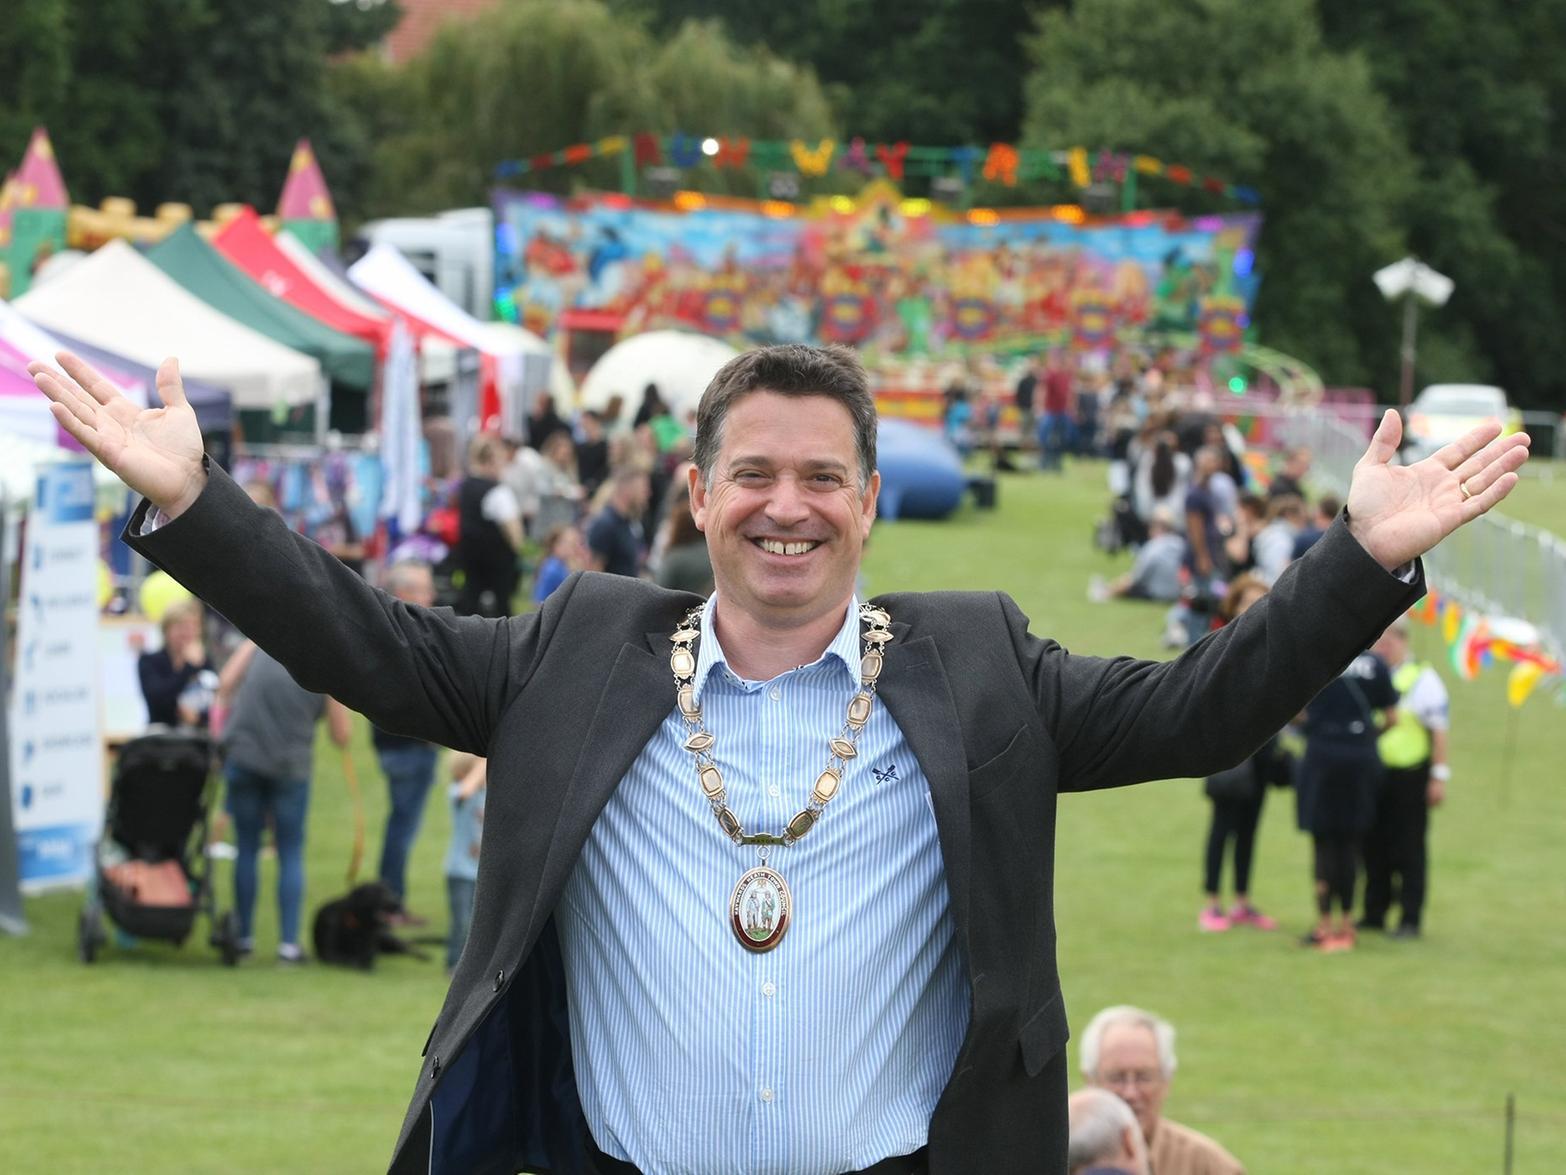 Haywards Heath Town Day will take place on Saturday, September 12 in Victoria Park, 120 South Road, Haywards Heath.

The event runs from 12pm until late.

The town also has its Spring Festival on Sunday, April 26, at Muster Green from 1.30 to 4.30 and its VE Day Celebrations on Friday, May 8 on Muster Green from 3pm to 6pm.

There will also be the 2020 2020 Yesterday and Tomorrow Week of Events - organised by Haywards Heath Town Team during the week of September 7 and includes a whole day of events in the town on Sunday, September 13. Yesterday and Tomorrow is in celebration of the formation of Haywards Heath and looking ahead to the future of the town.